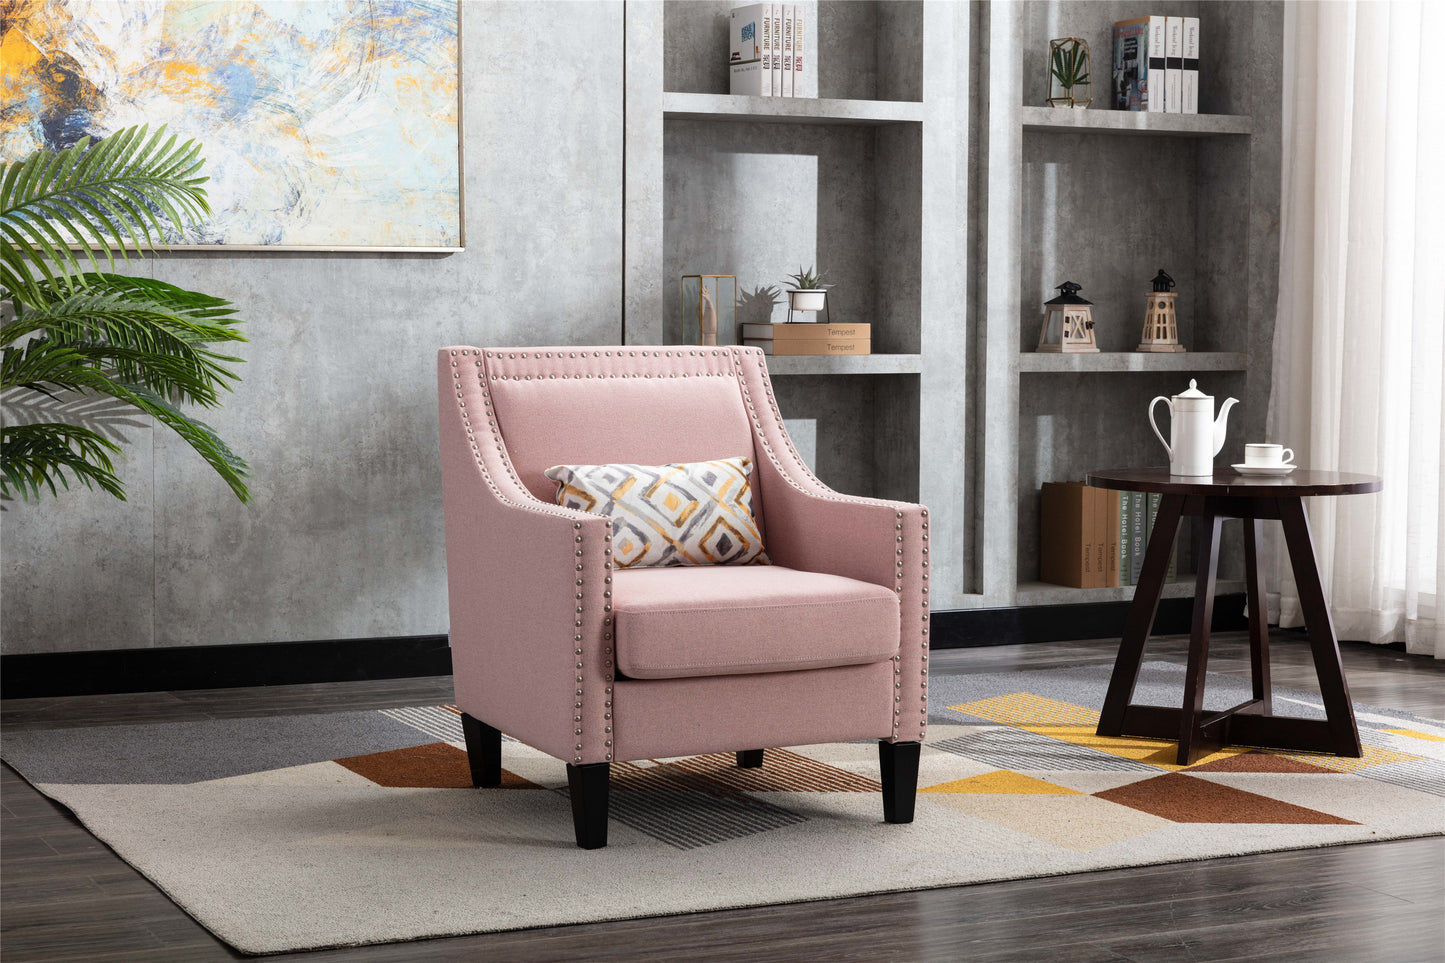 accent armchair living room chair  with nailheads and solid wood legs  Pink  Linen